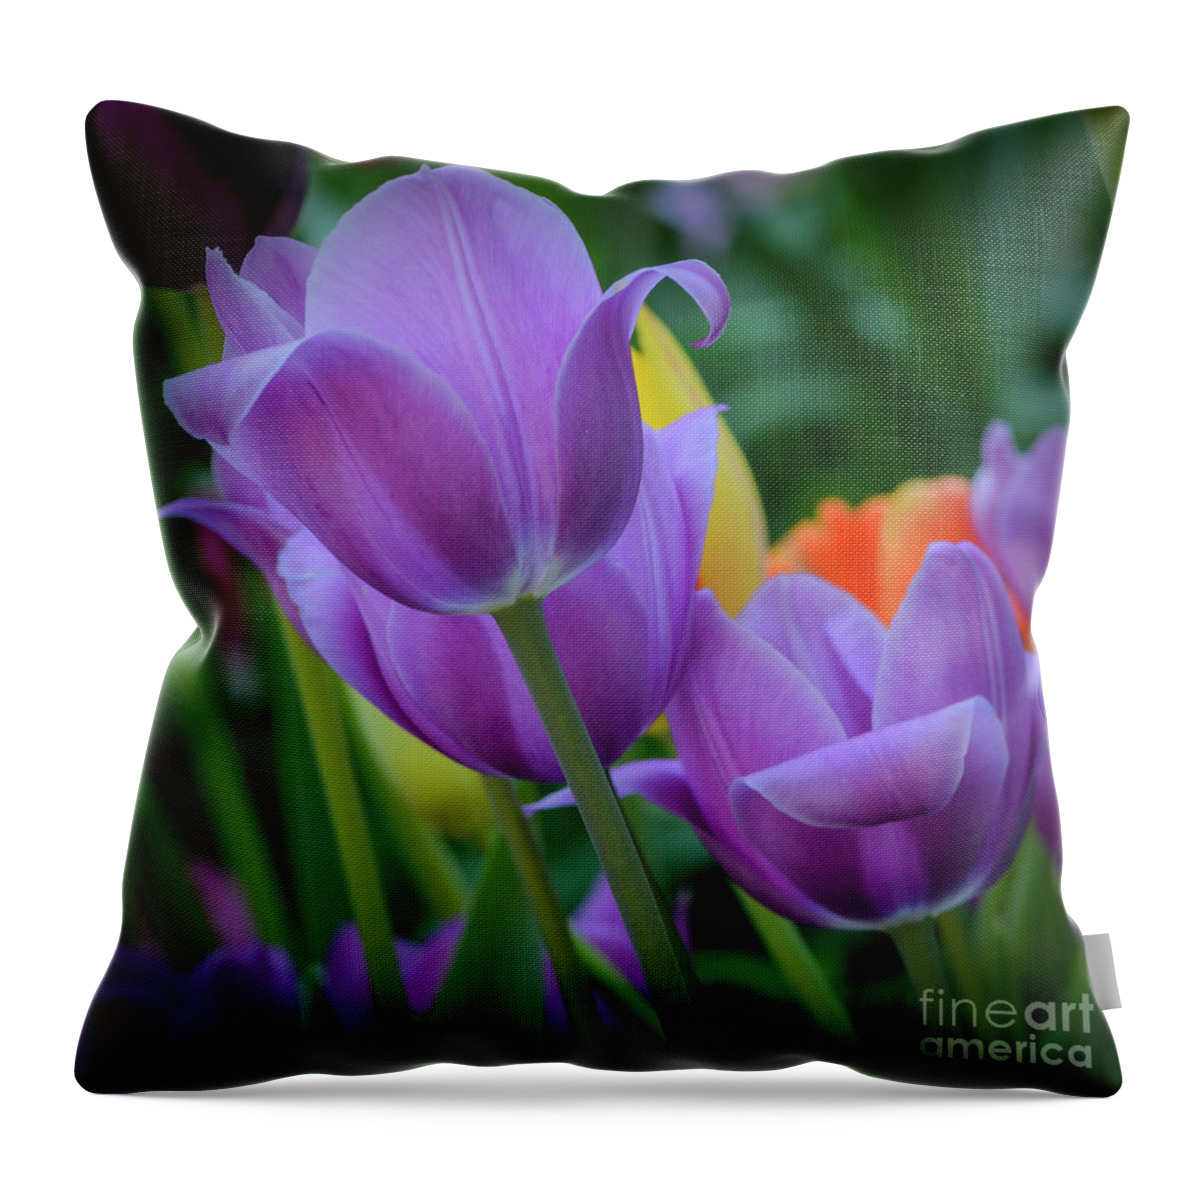 Tulips Throw Pillow featuring the photograph Lavender Tulips by Tamara Becker